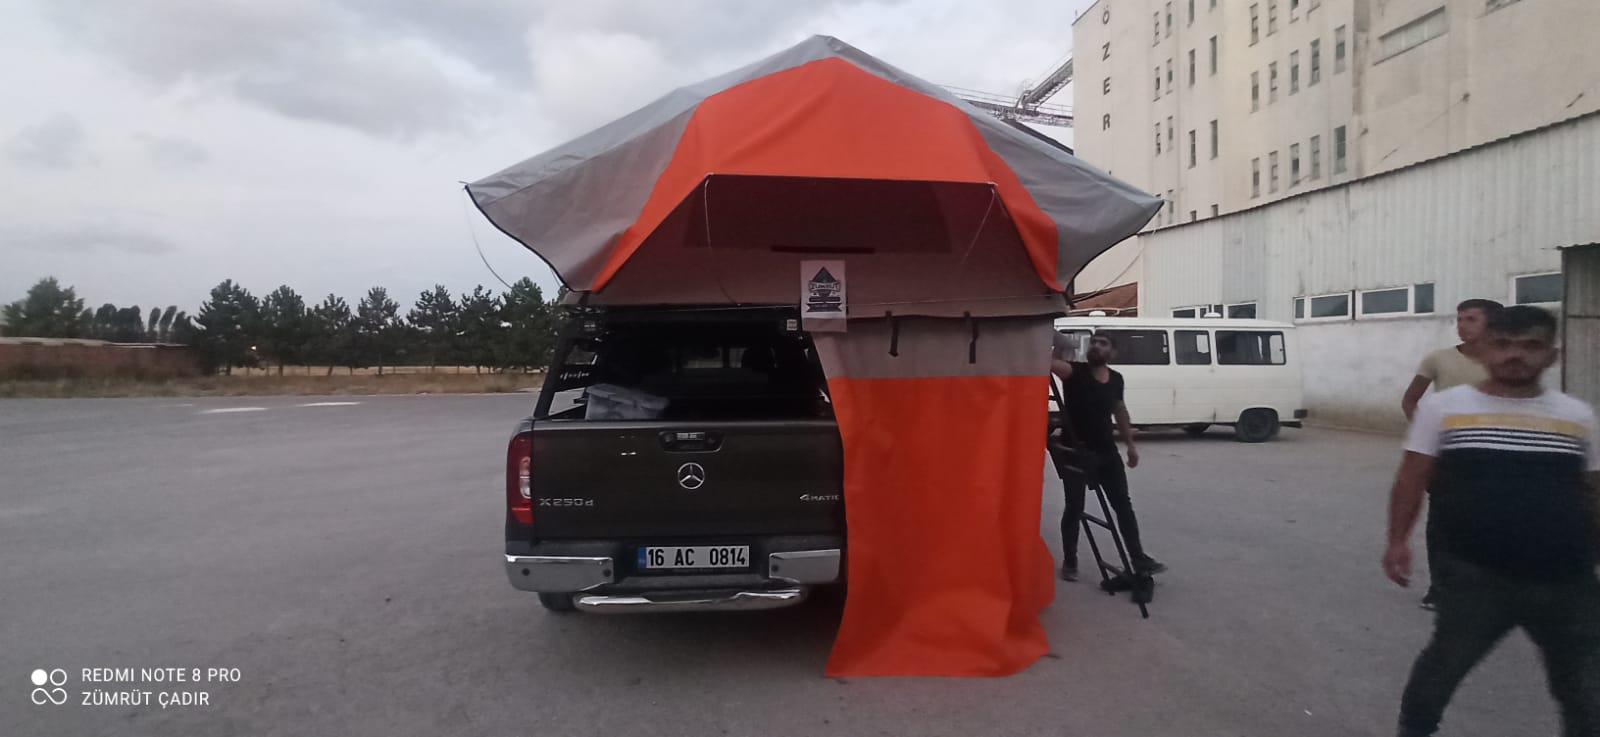 Rooftop Tents:All Season with Rainfly Shoes Bag Ladder 2+1 Pax Large Door High Density Mattress